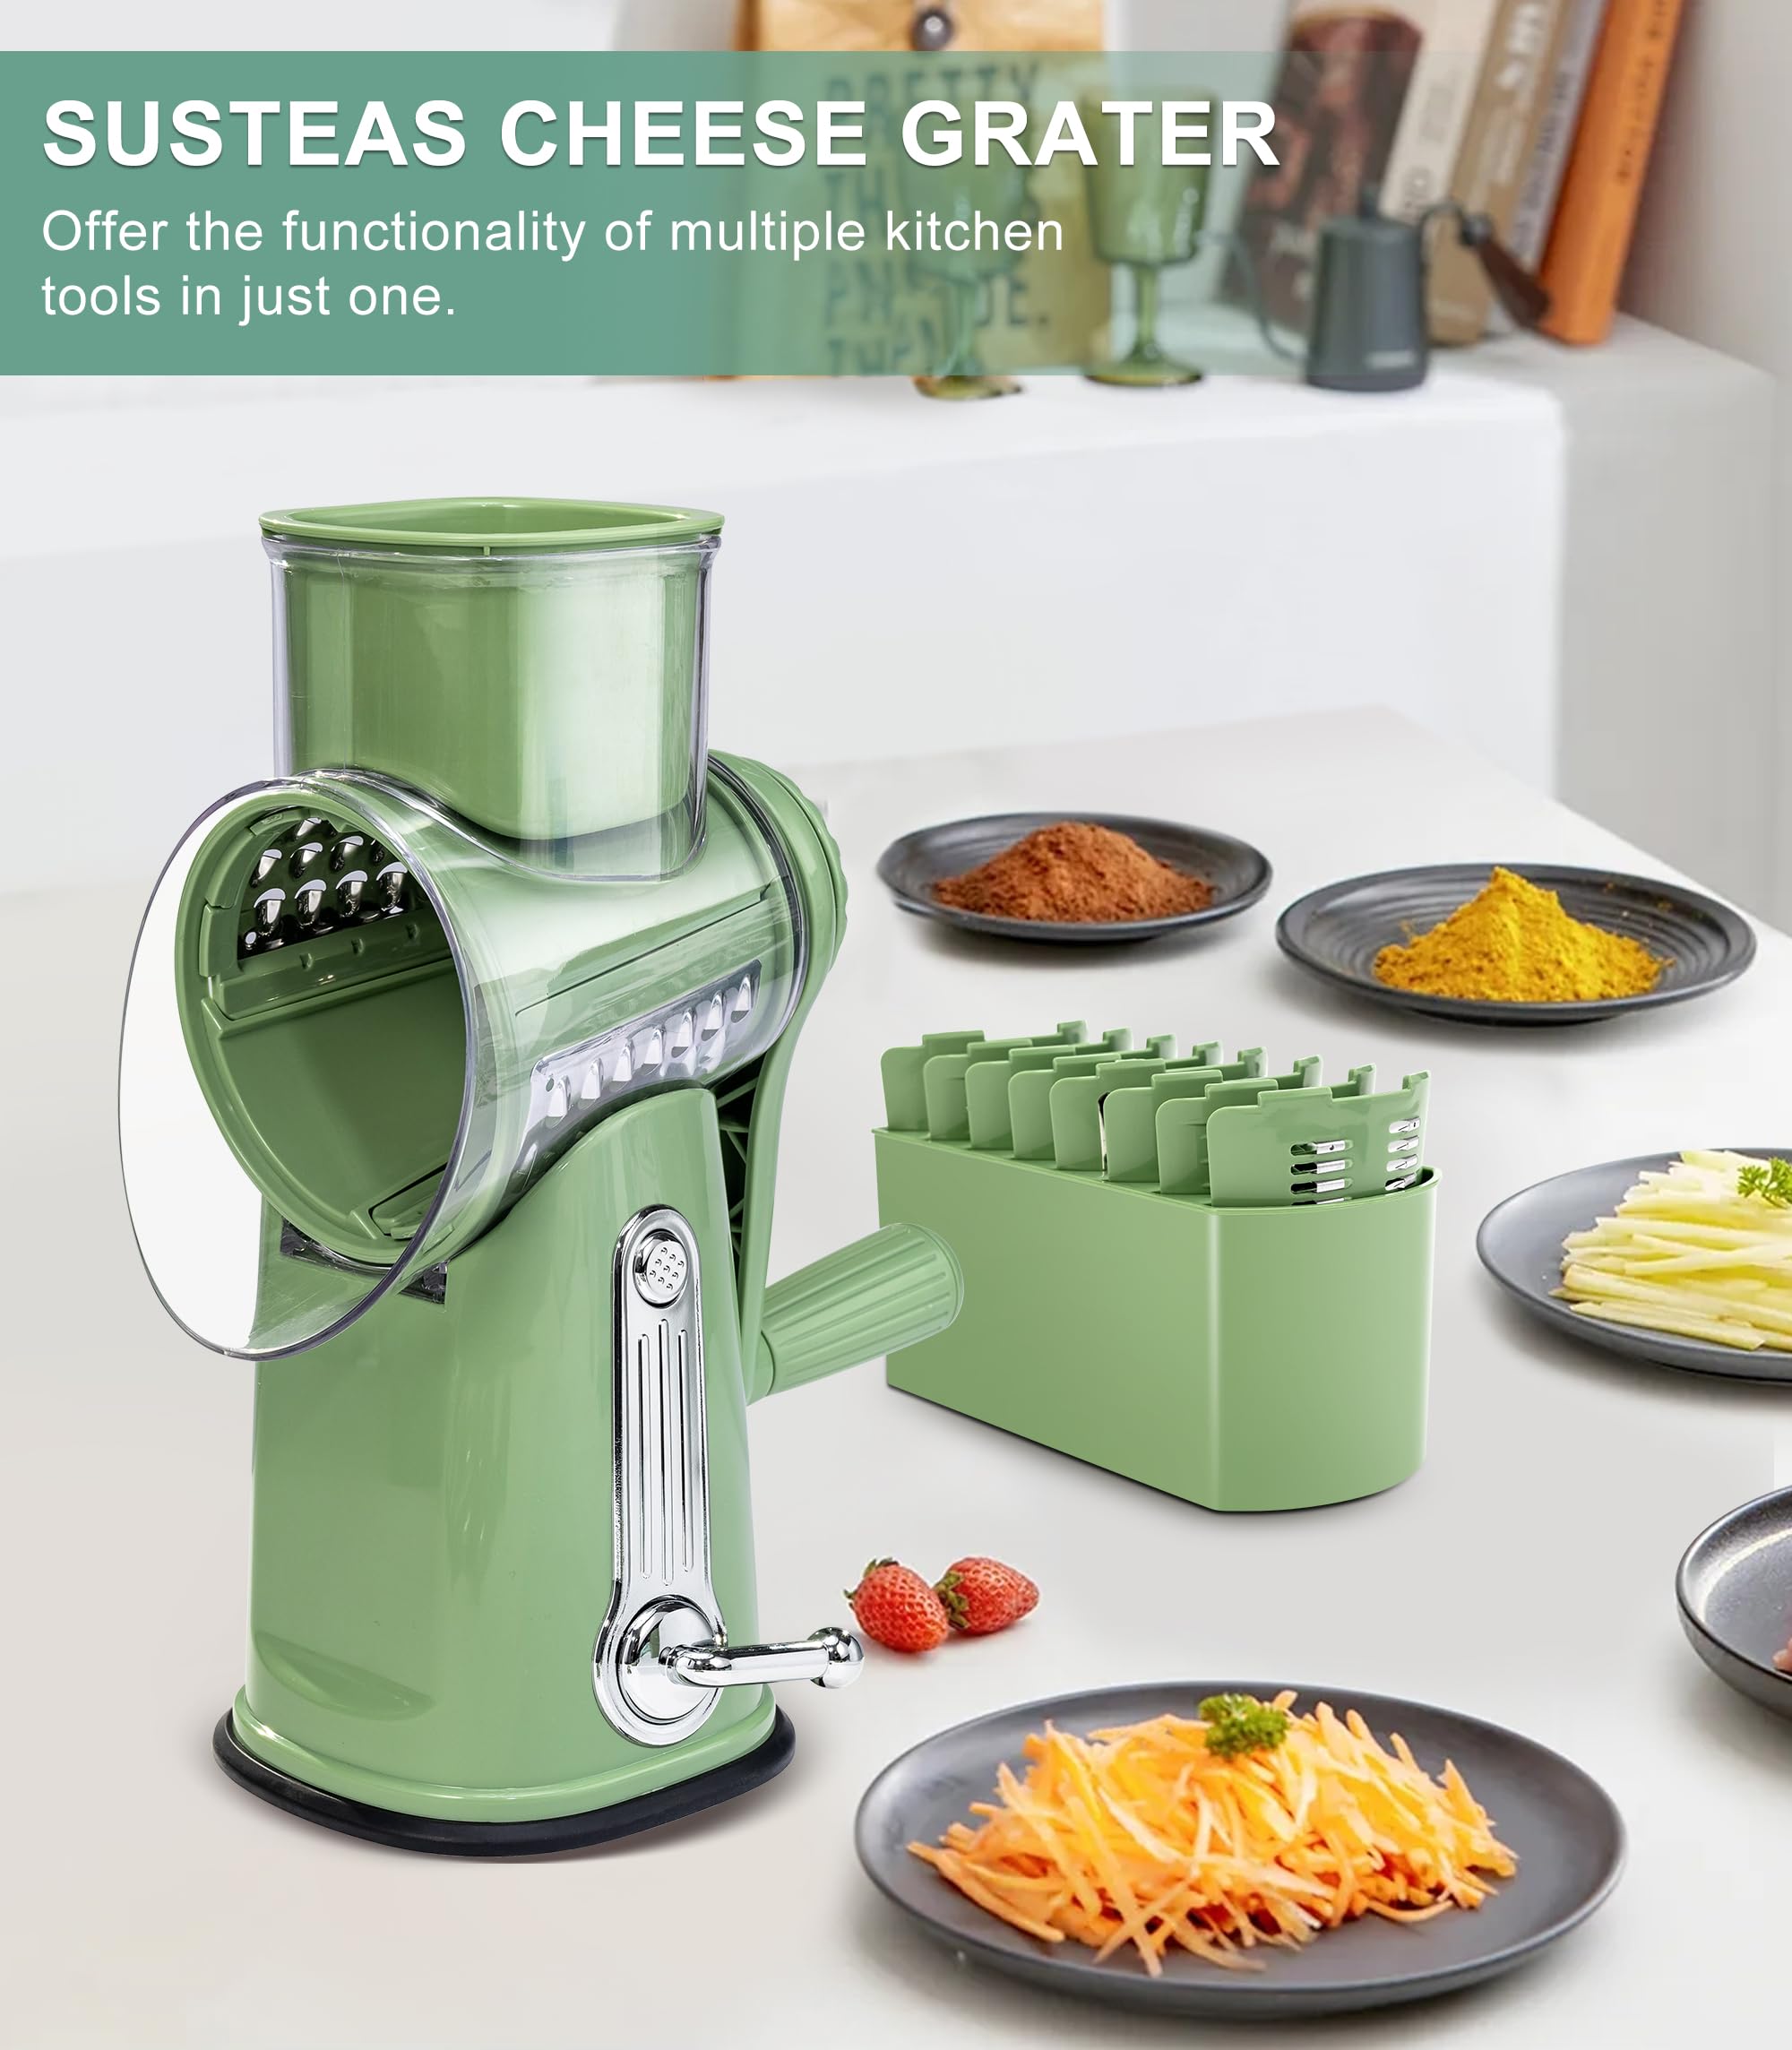  5 in 1 Cheese Grater, Cheese Grater Hand Crank,Cheese Grater  with Handle, Replaceable Stainless Blades Cheese Shredder, Mandoline  Vegetable Slicer, Easy to Clean Rotary Cheese Grater with Storage Box: Home  